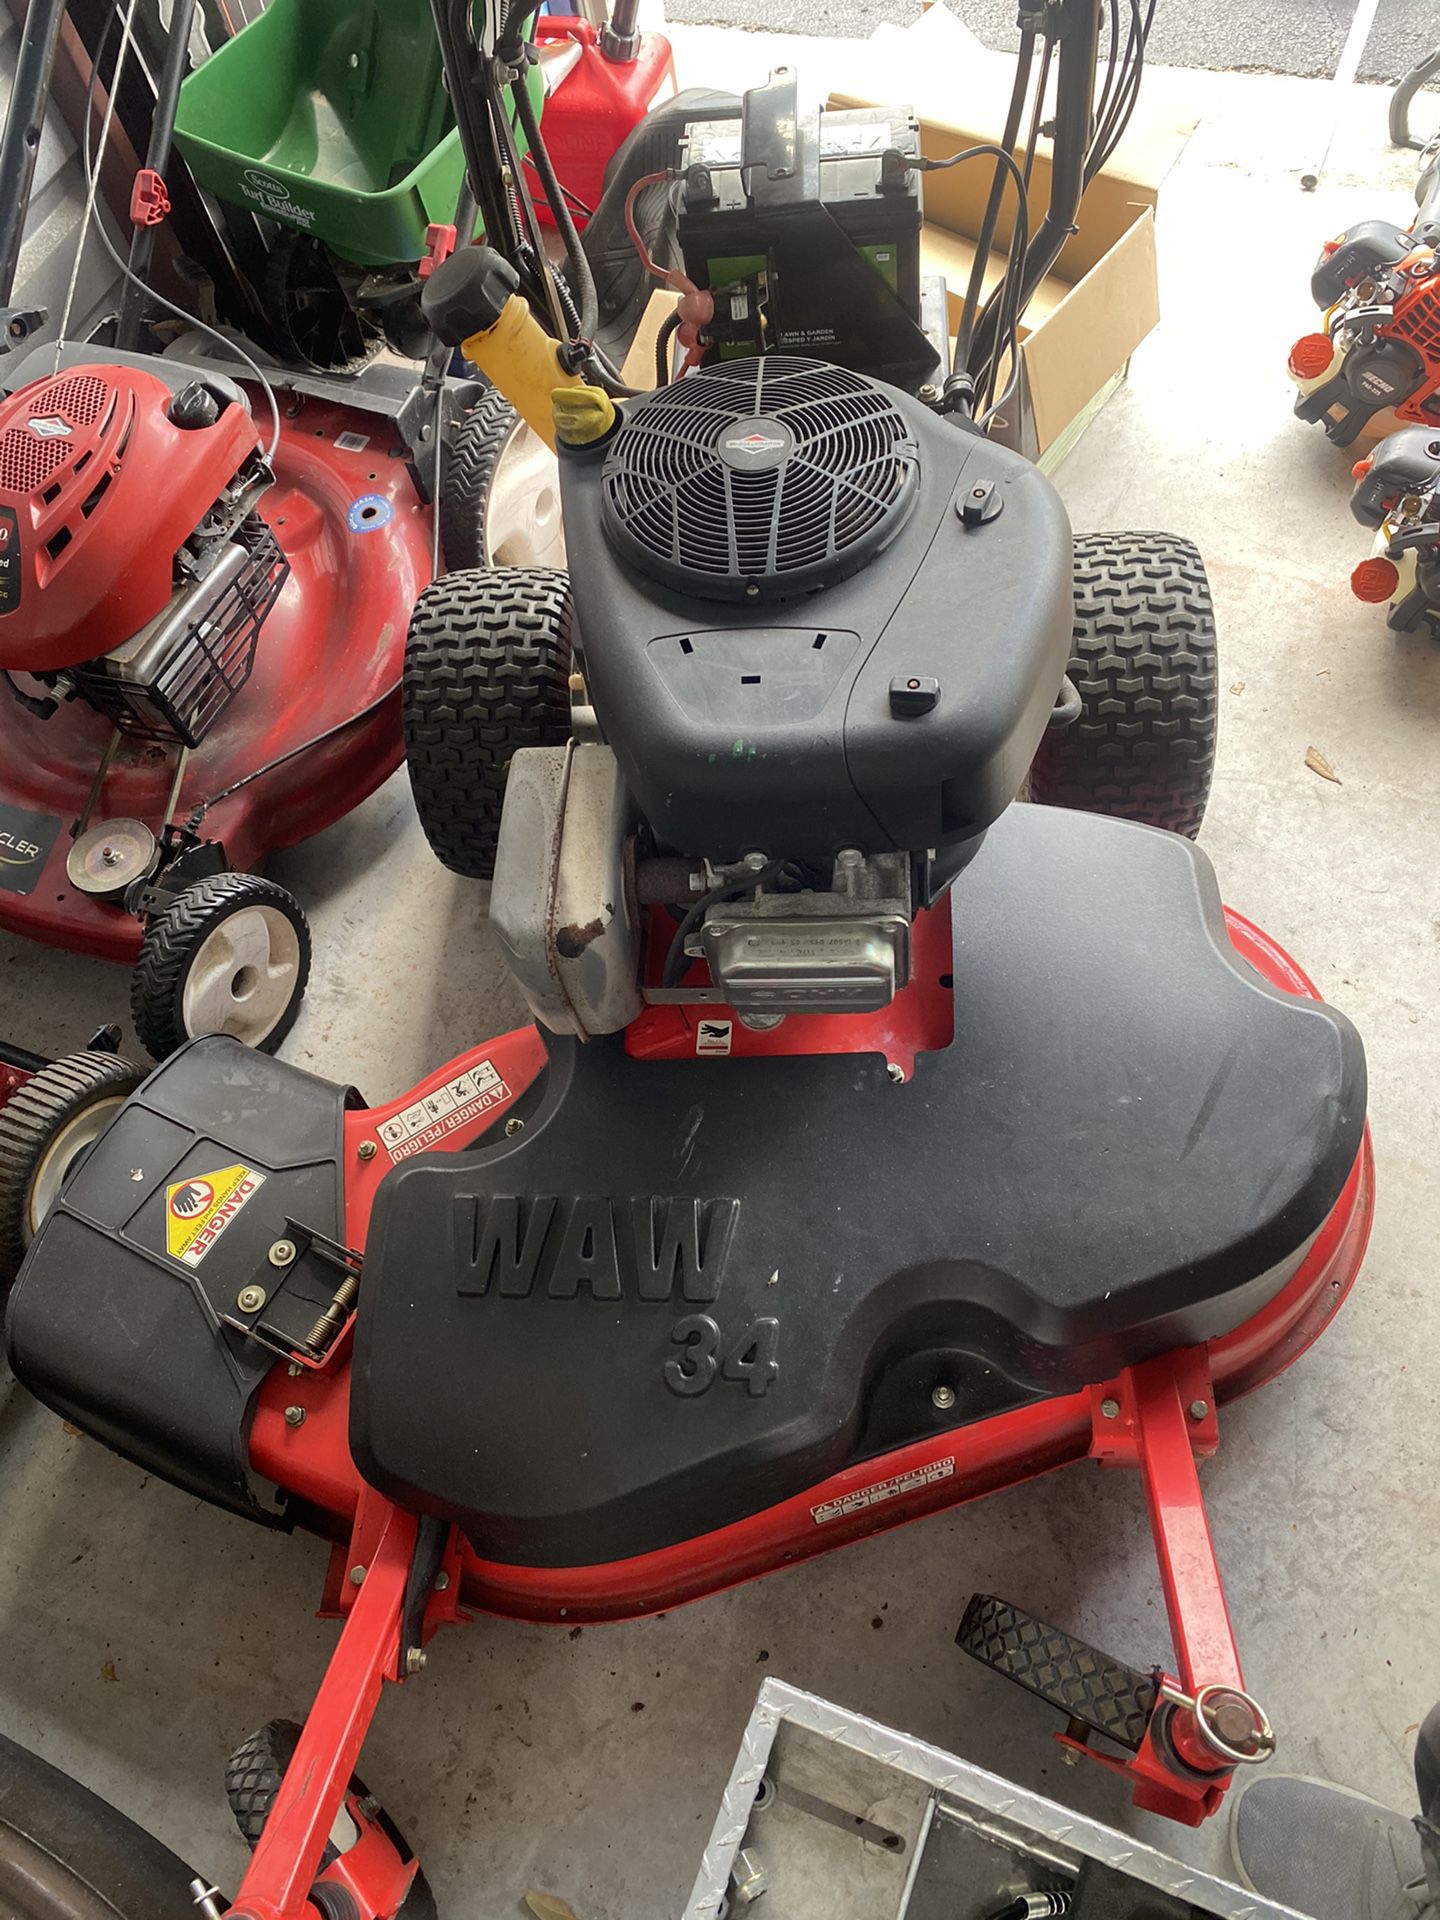 34” Gravely Waw Self Propelled Lawnmower 